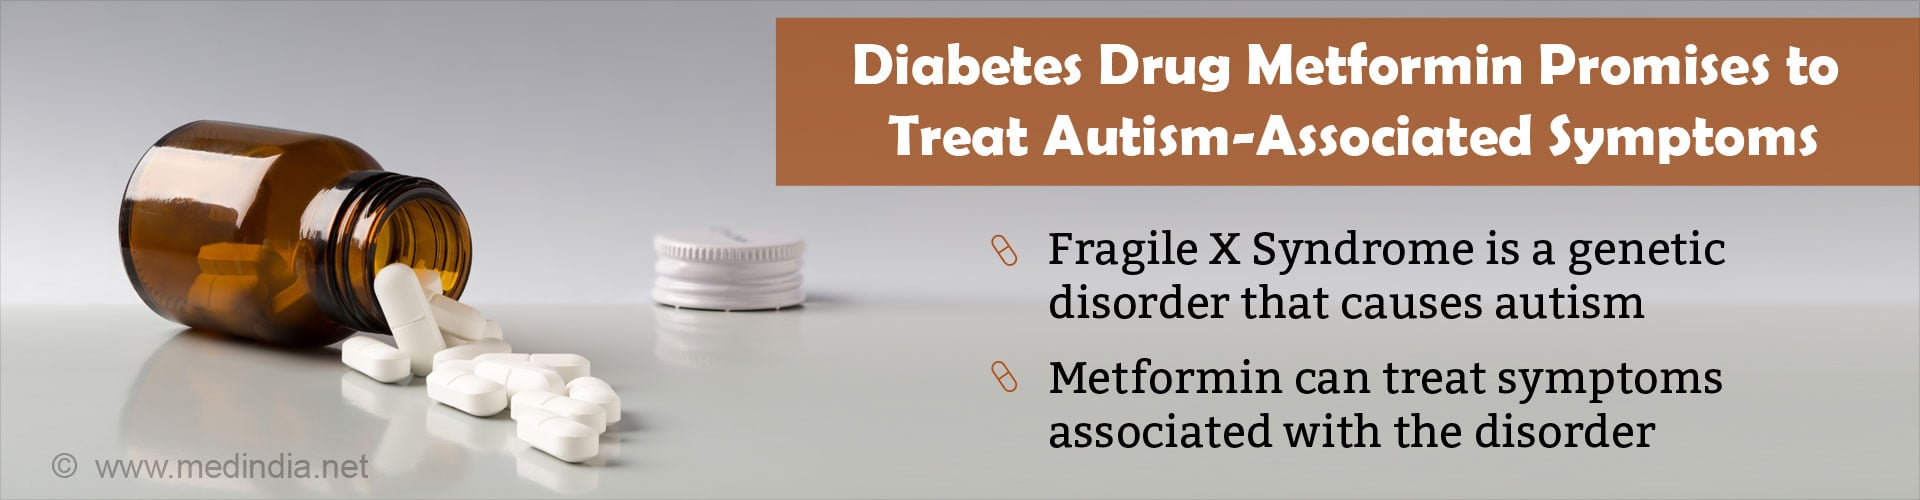 Diabetes drug metformin promises to treat autism-associated symptoms
- Fragile X syndrome is a genetic disorder that causes autism
- Metformin can treat symptoms associated with the disorder